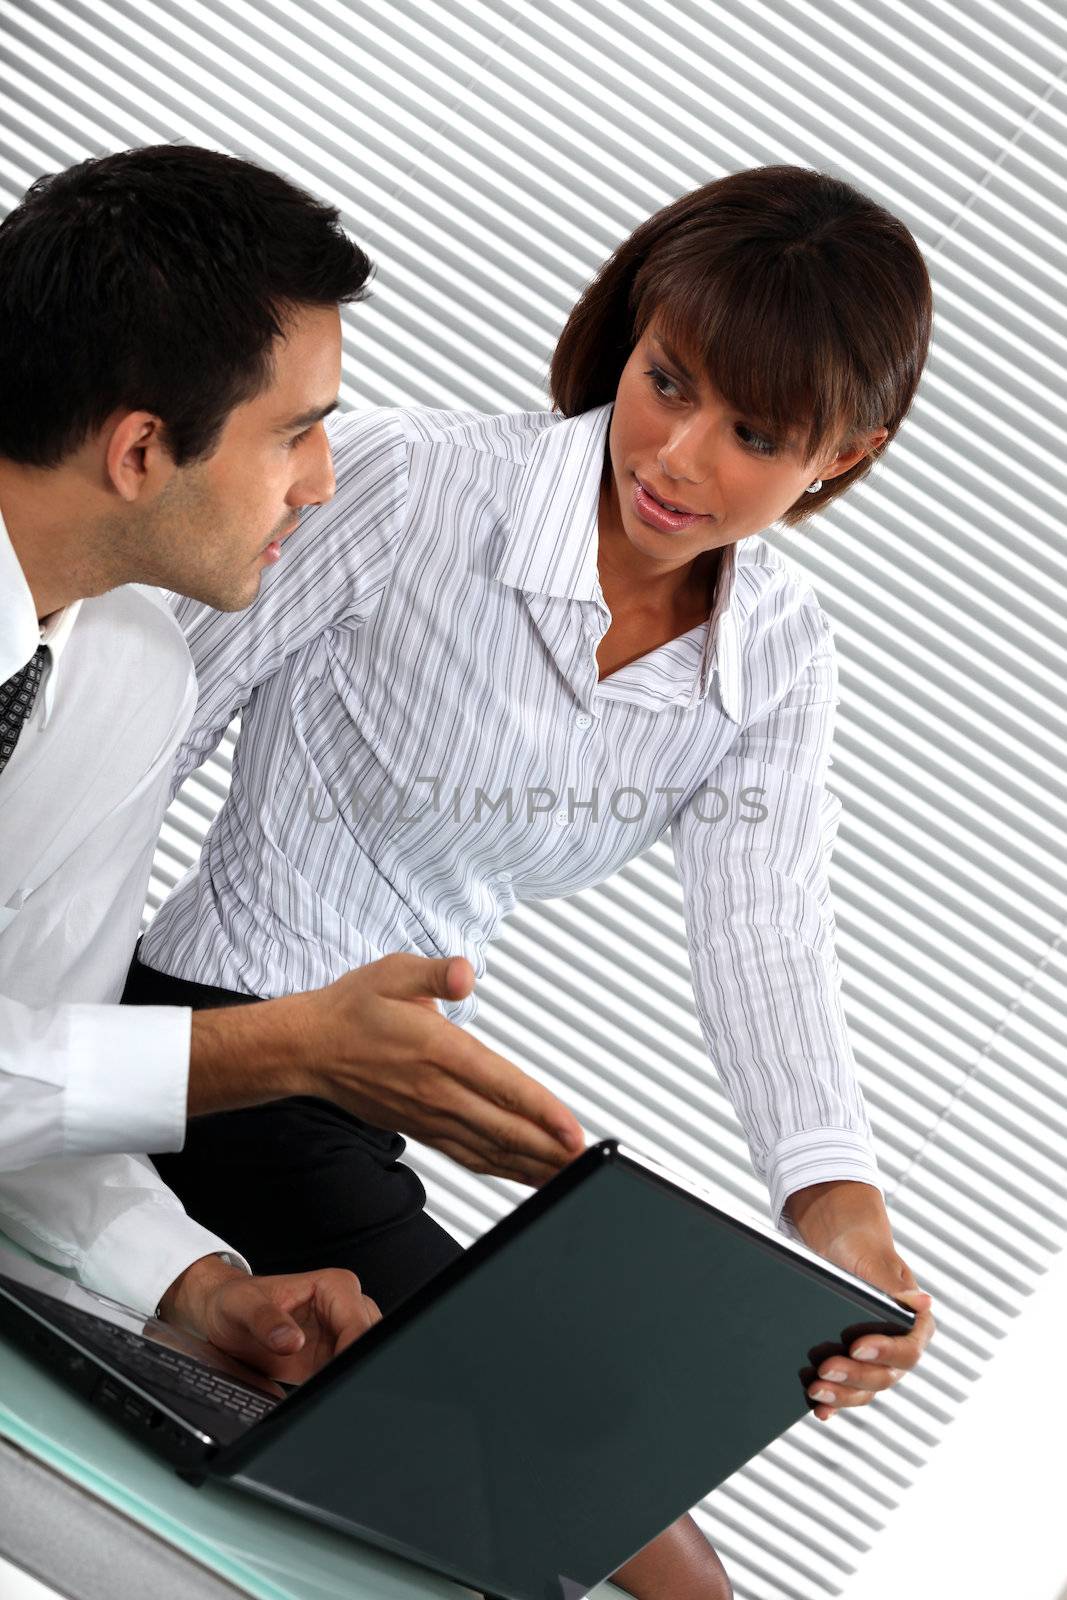 Colleagues discussing a business report